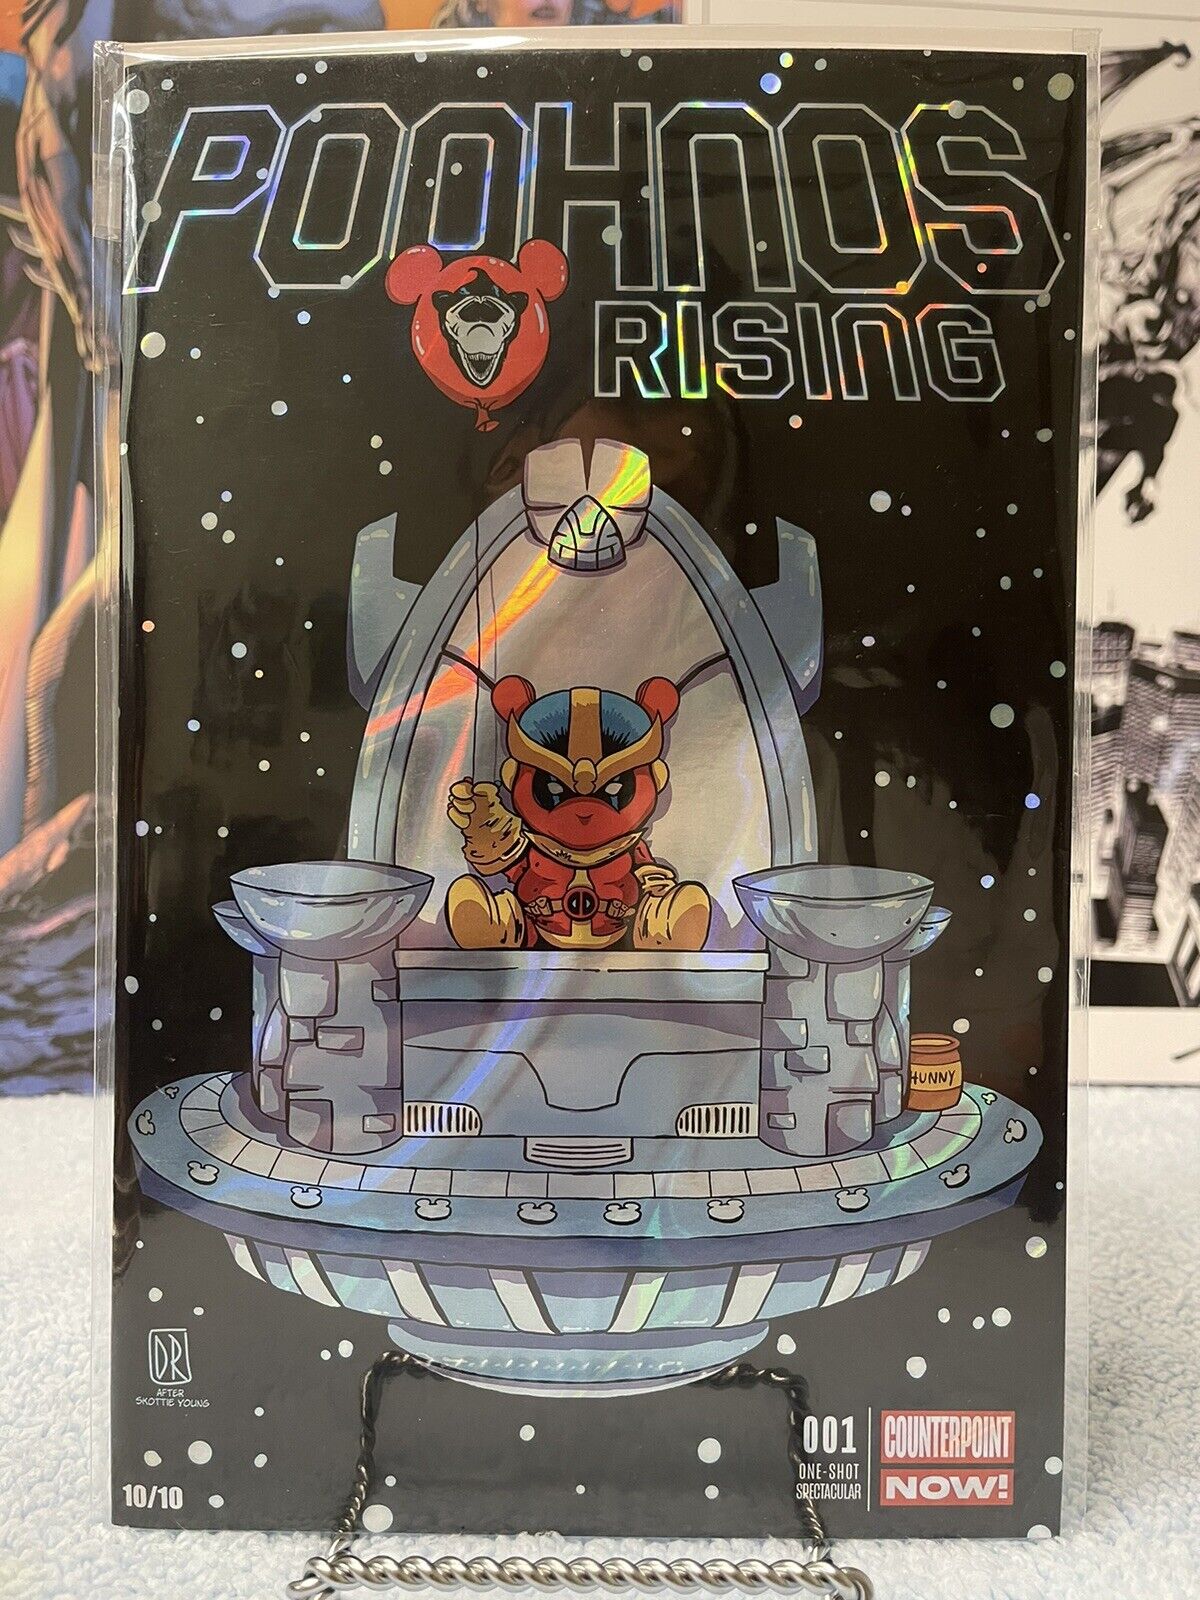 Poohnos Rising #1 - Davis rider After Young Homage Megacon Excl Lava Foil 10/10